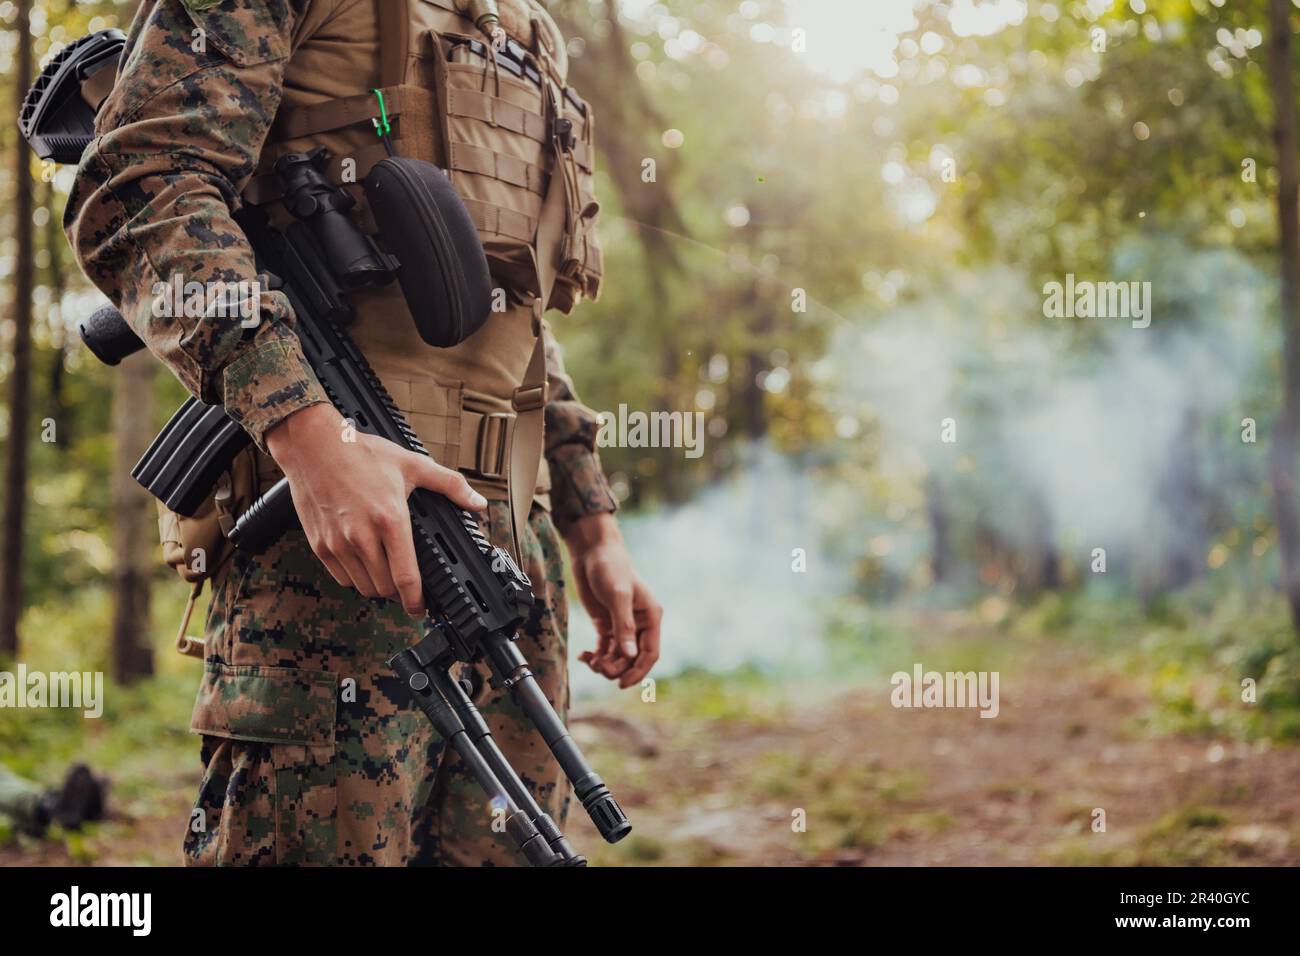 Soldier portrait with protective army tactical gear and weapon having a break and relaxing Stock Photo